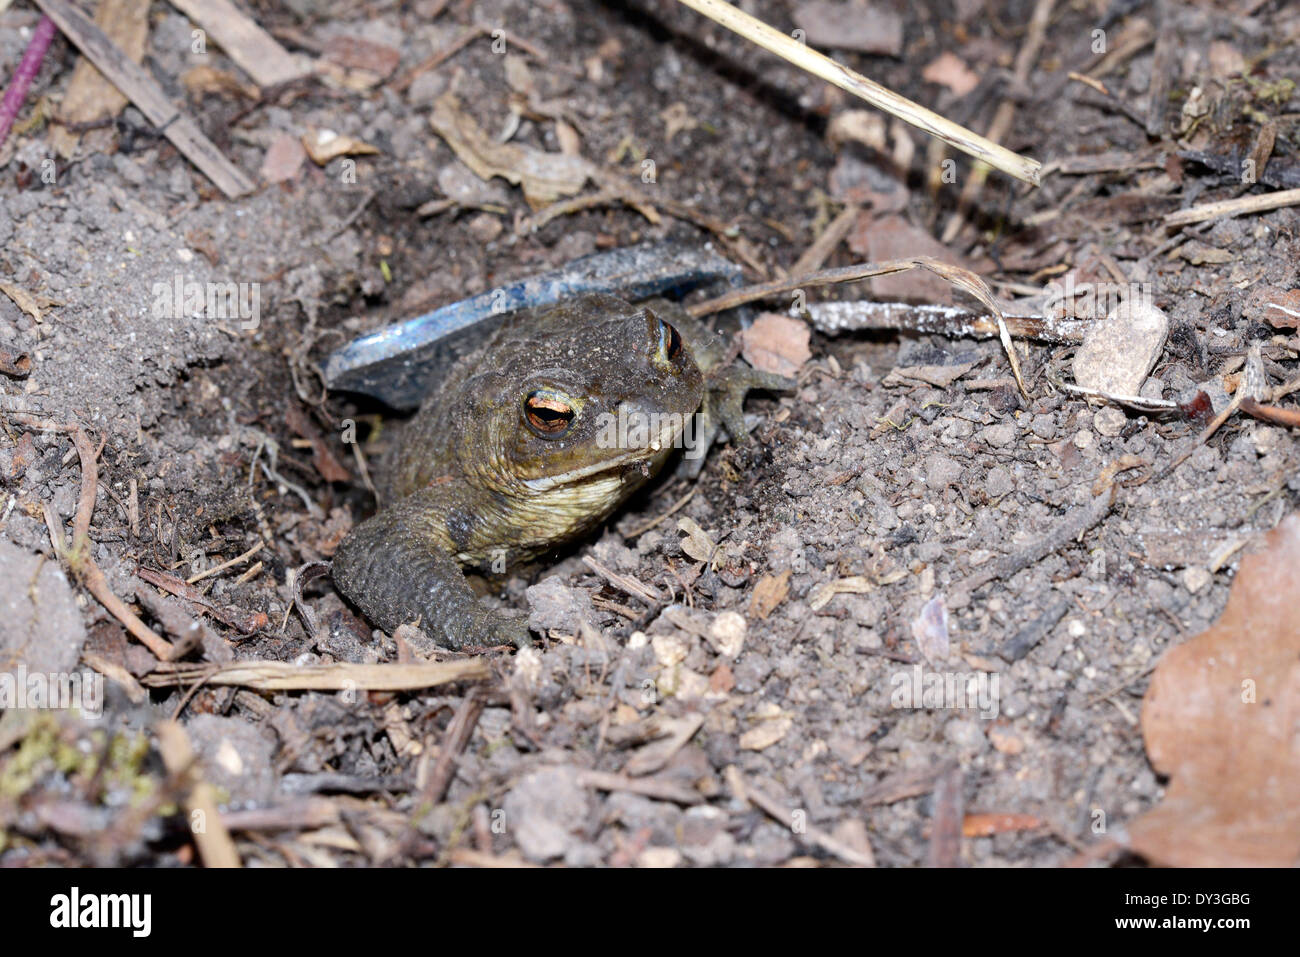 Toad in the hole. A common toad (Bufo bufo) sits in a hole for protection from predators. Stock Photo